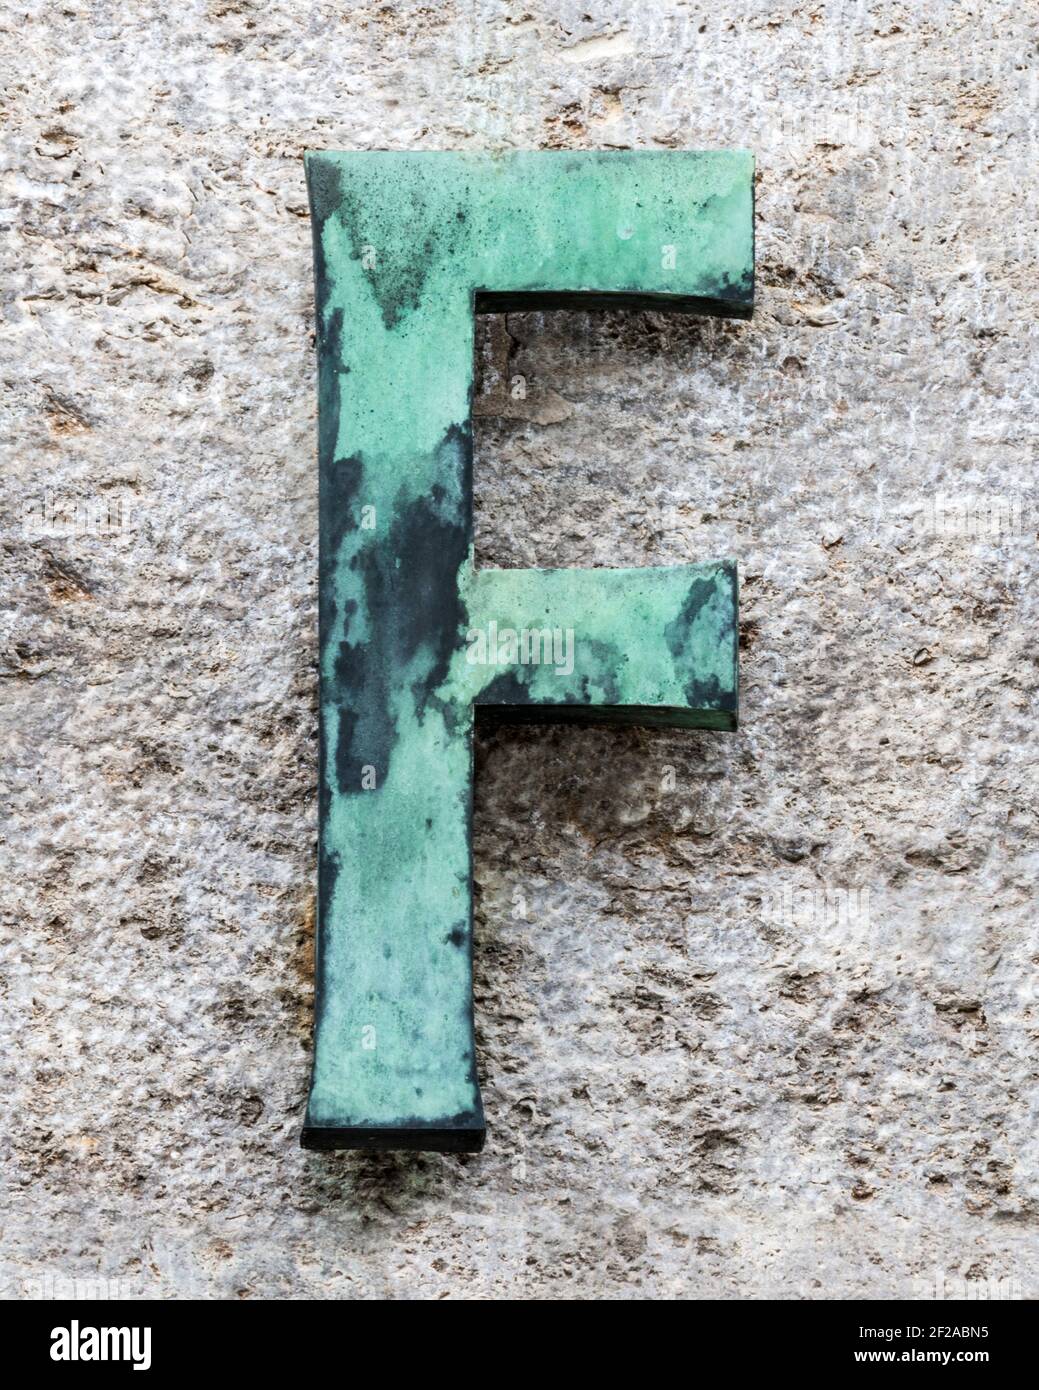 Metal letter F covered with verdigris on a natural stone wall Stock Photo